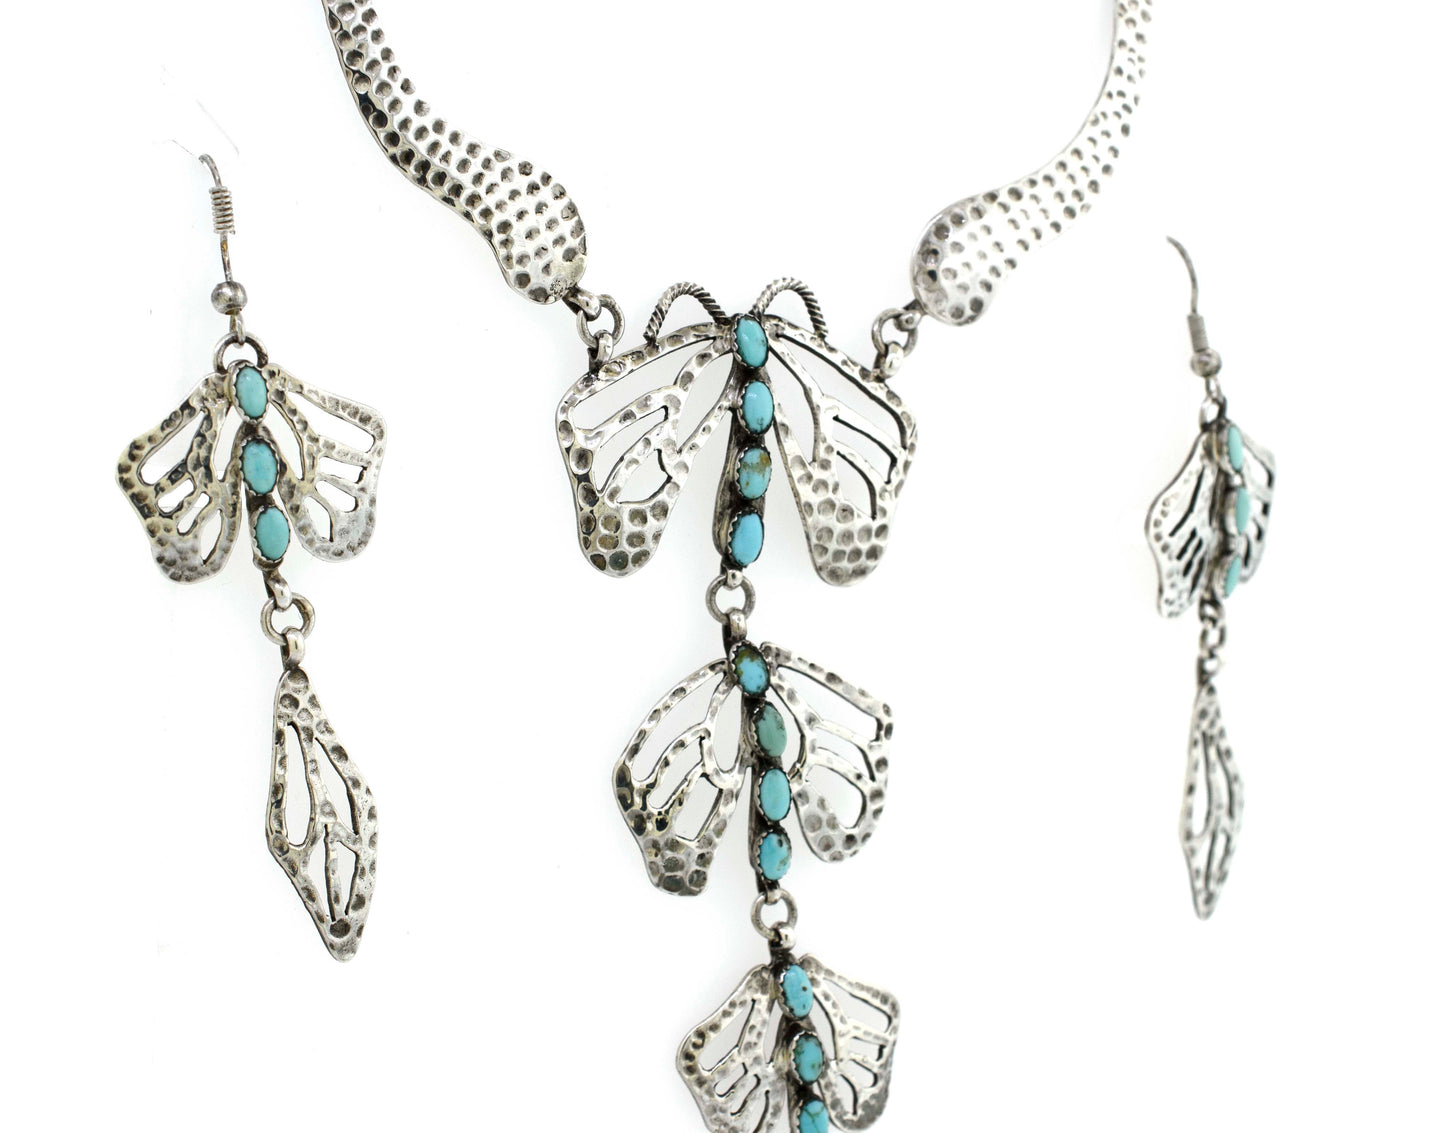 A Super Silver Handmade Turquoise Dragonfly Necklace And Earring Set with a touch of turquoise.